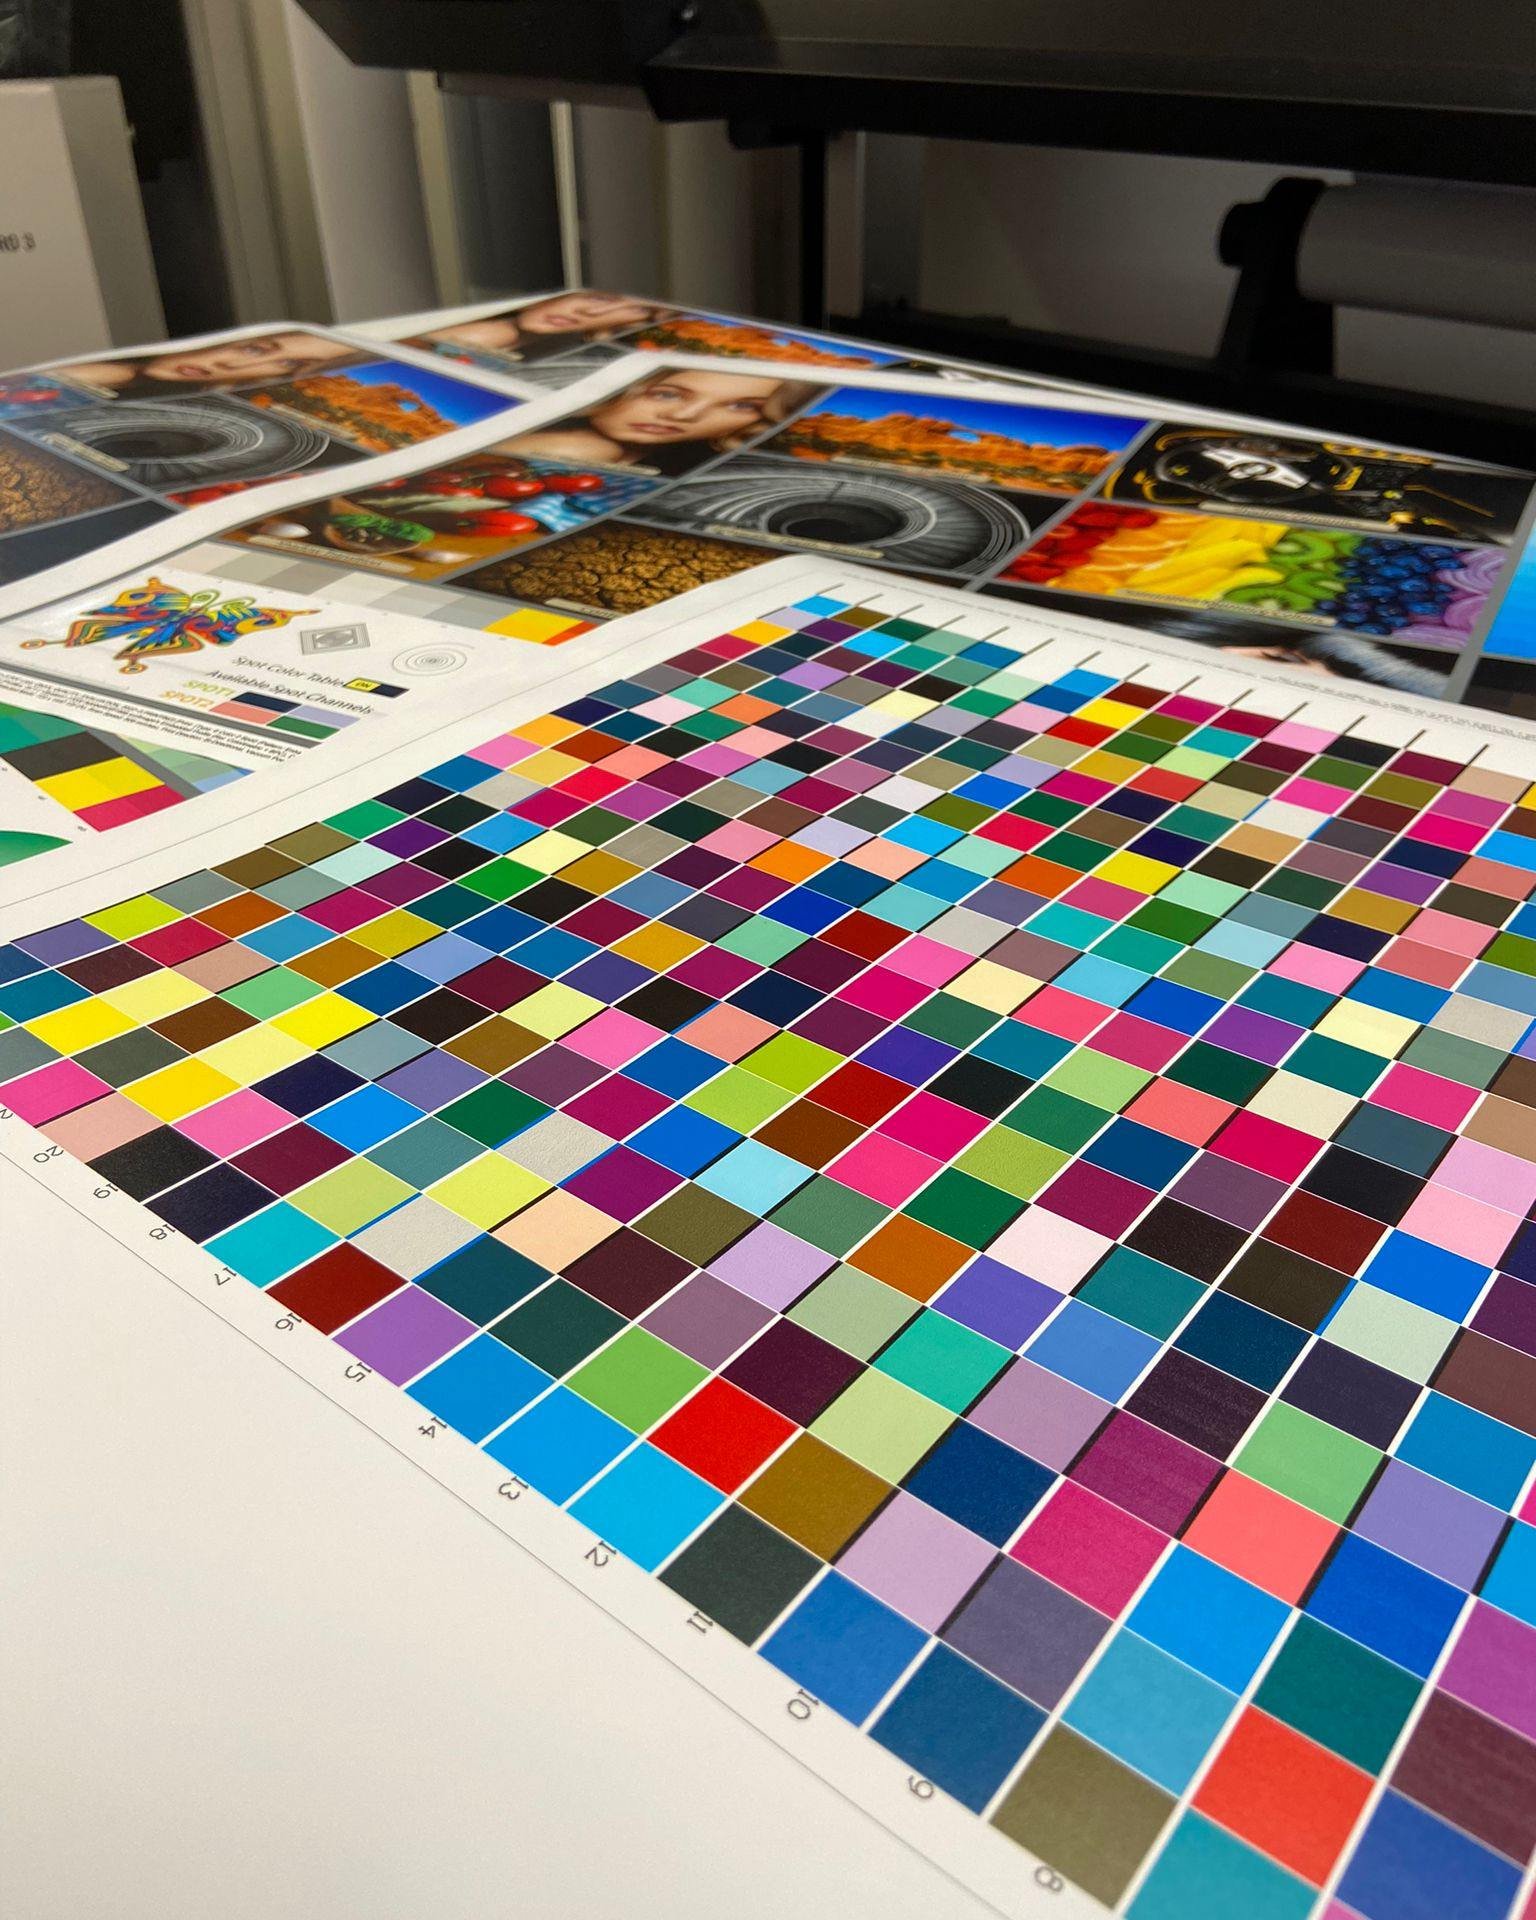 Professional colour matching in our certified Lab with our new brand Fine Art Printing 

Don't forget to follow us on Facebook and Instagram.

#fineartprinting #chromaluxe #xrite #madebyGBM #giclee #colourmatching